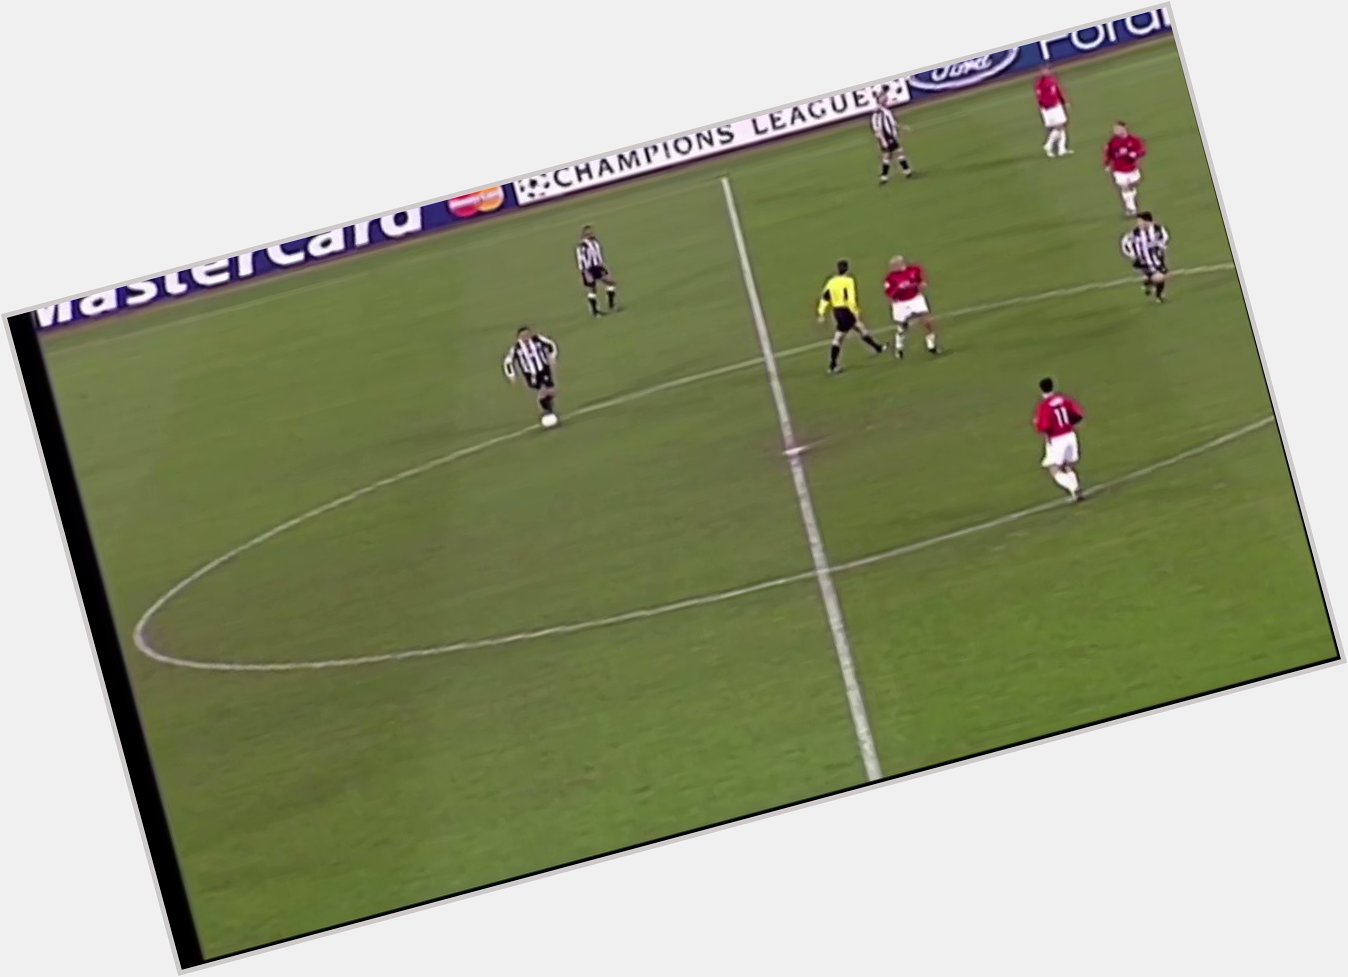 Happy Birthday Ryan Giggs who remembers this goal against Juventus 